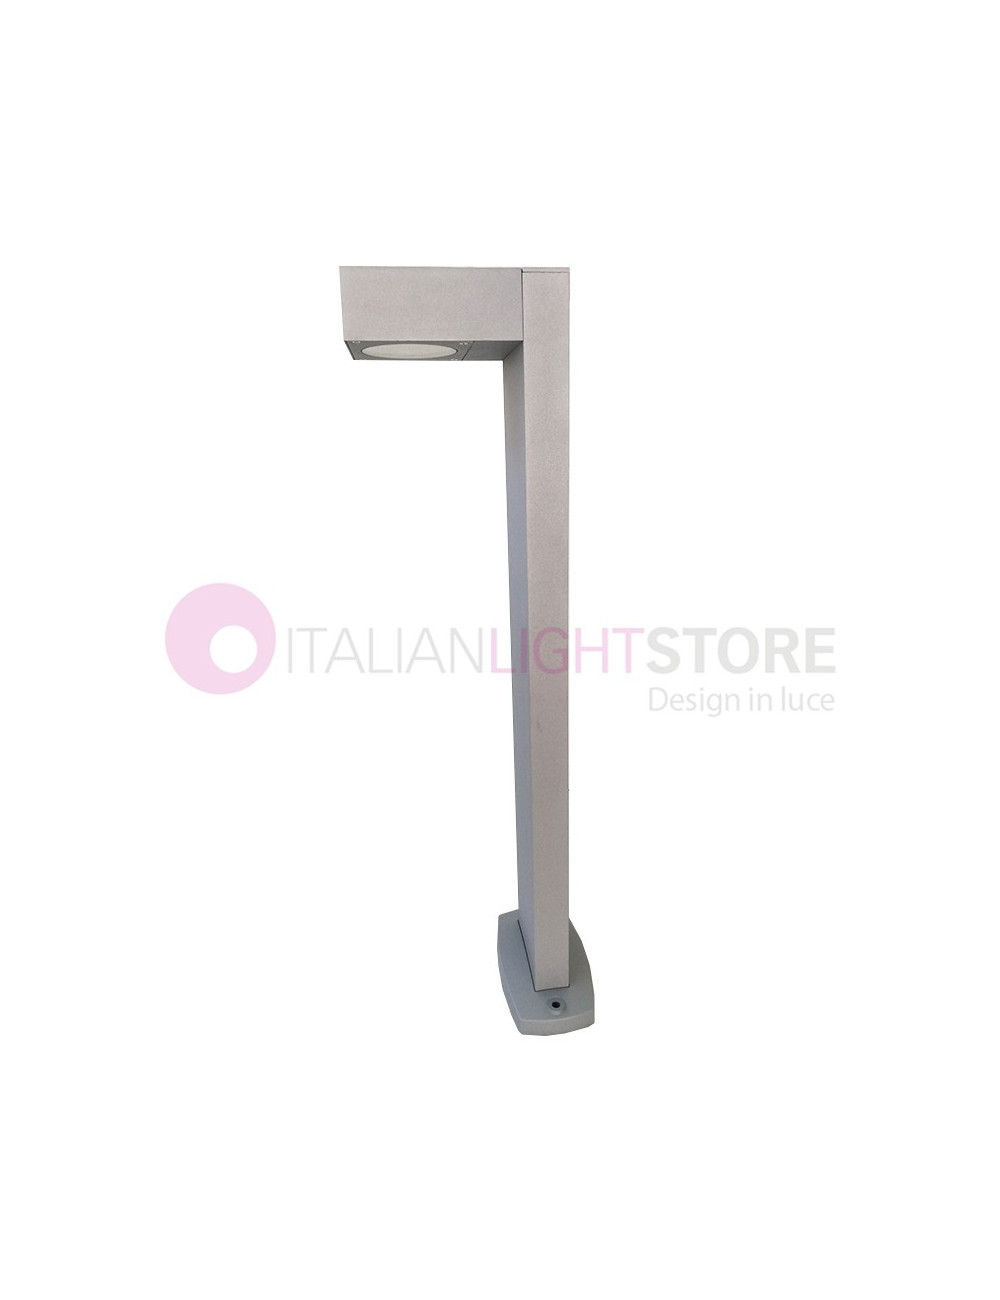 KING Lantern Post modern Built-in Led h 65 Lighting Outdoor IP54 - OFFER a FEW PIECES